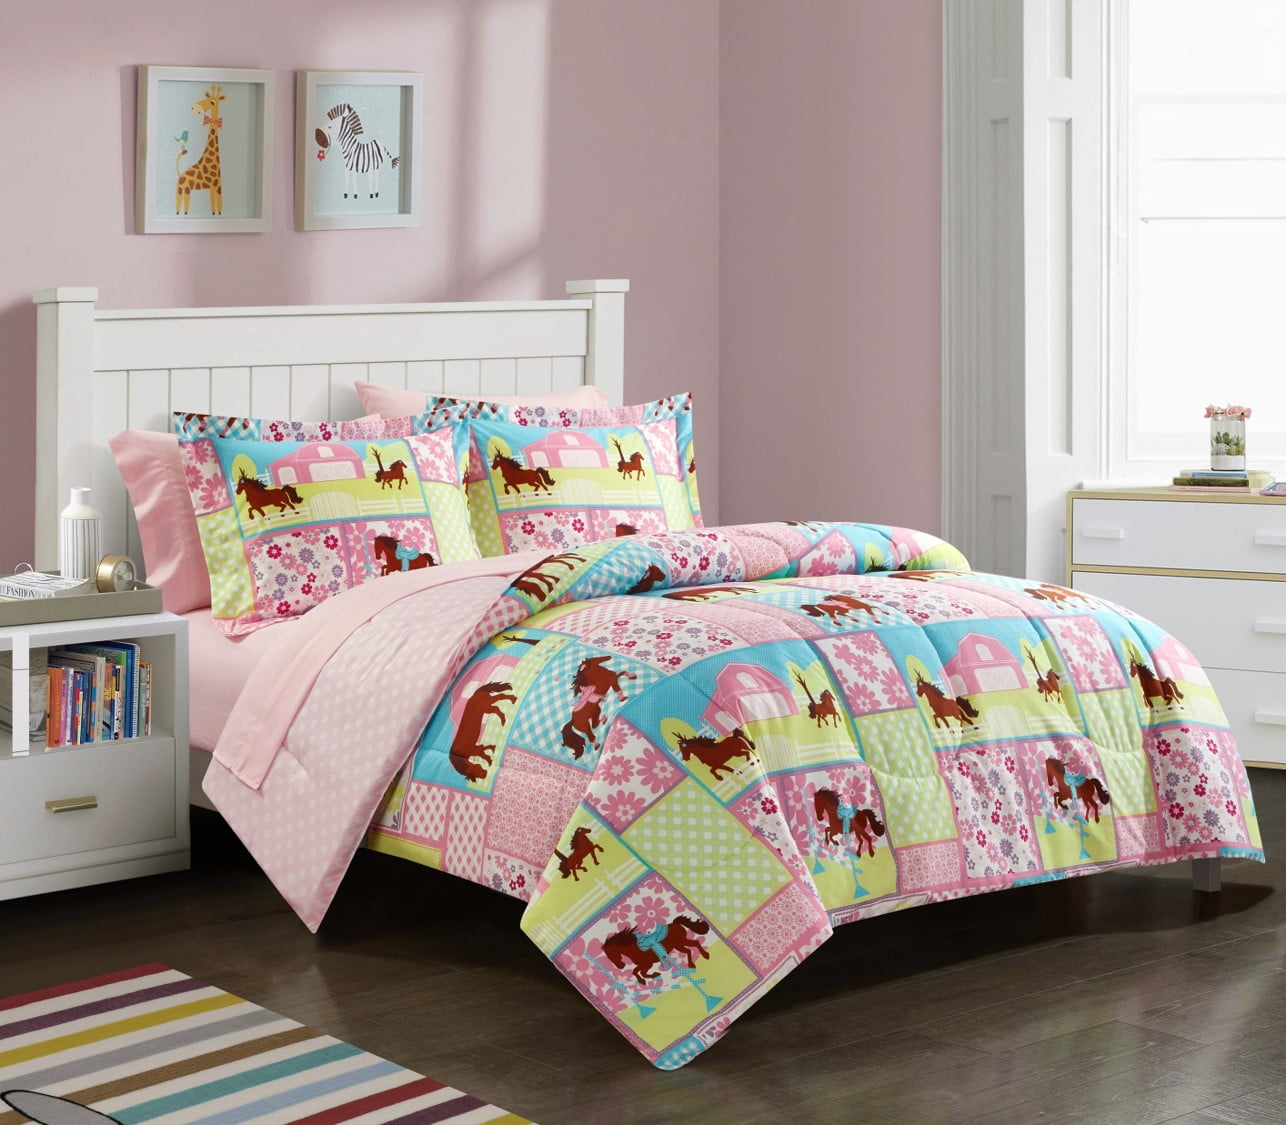 Details about   Mainstays Kids Country Meadows Bed in a Bag Bedding Set New 